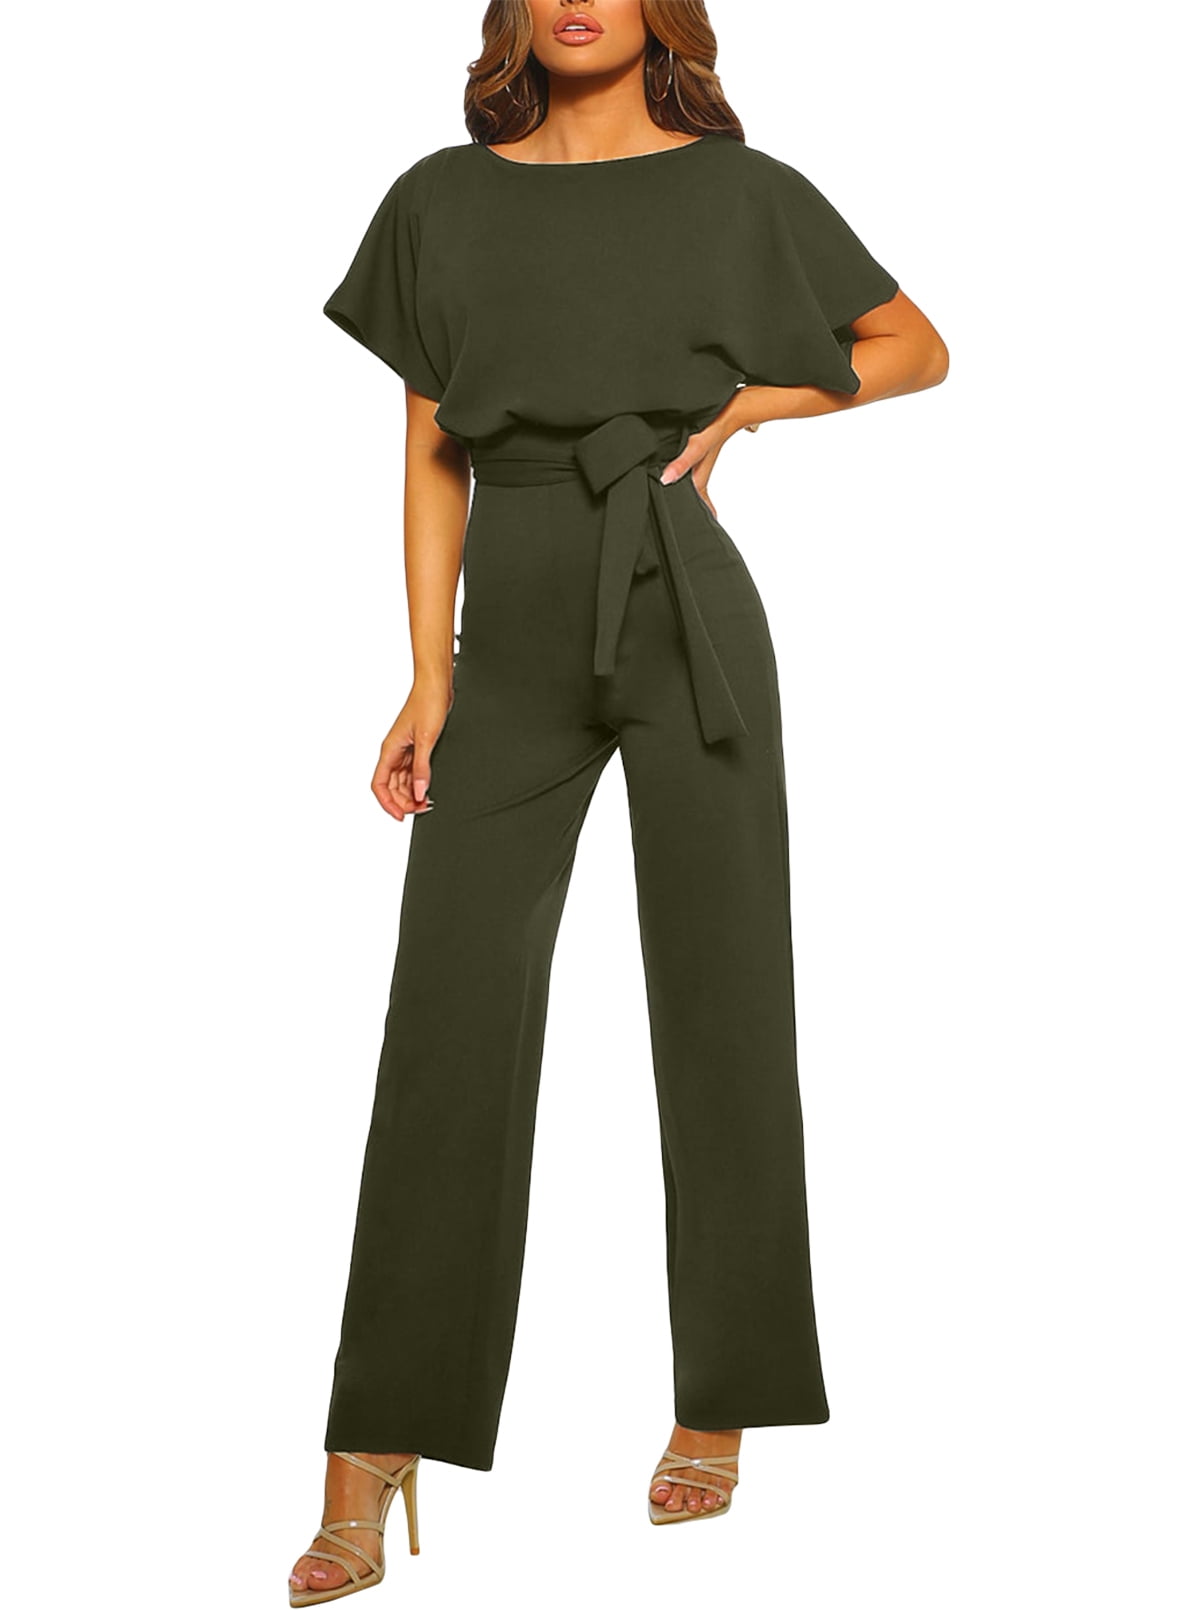 WAo Womens Short Sleeve Jumpsuit Solid Color Belted Playsuit Wide Leg Pants Elegant Rompers Casual Jumpsuits with Belt